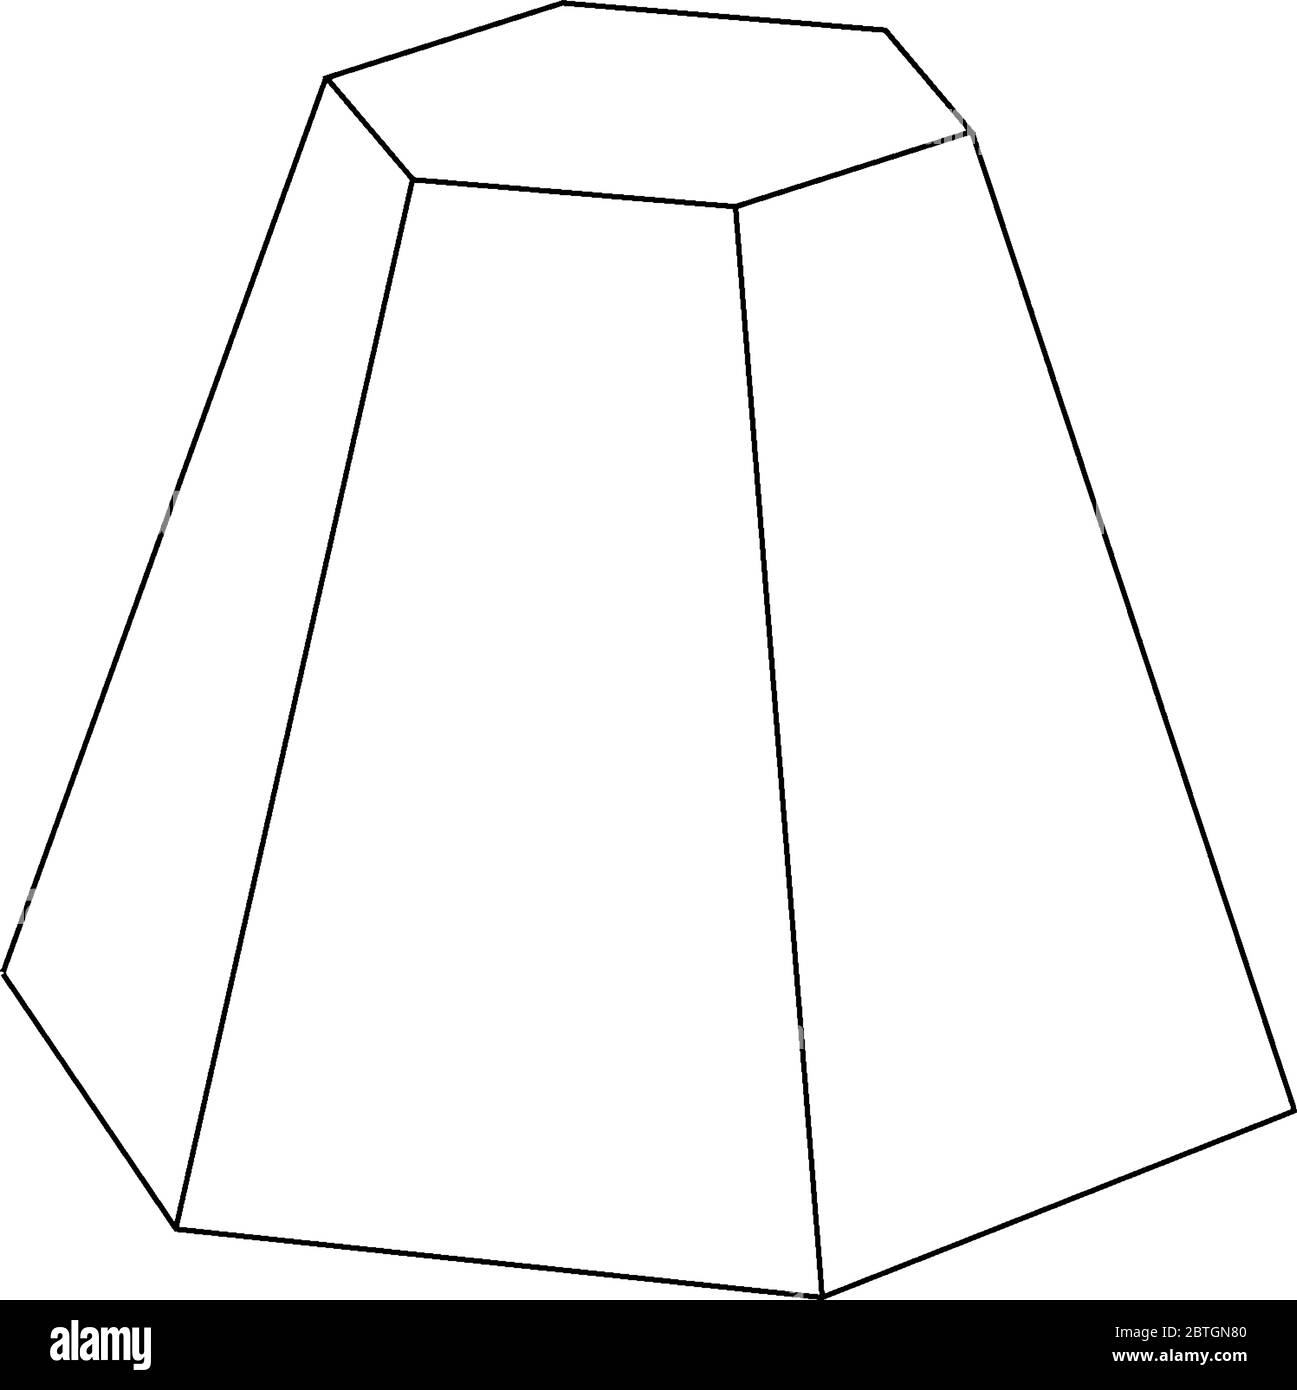 It’s an hexagonal pyramid which has six sides and all are equal by 120 degree angle and length, vintage line drawing or engraving illustration. Stock Vector